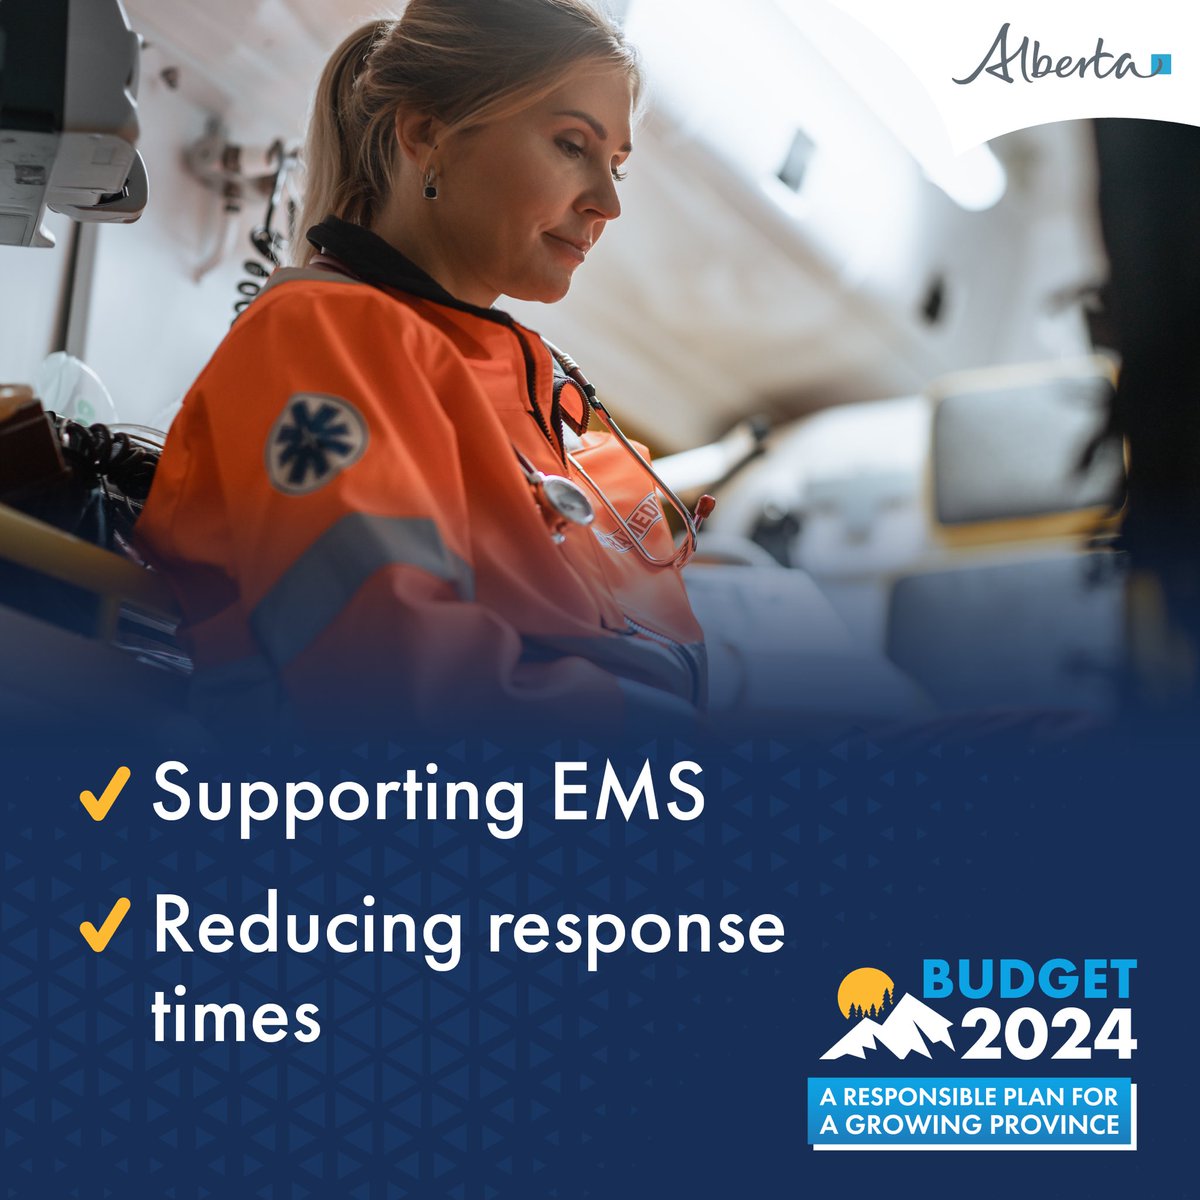 Budget 2024 invests in reducing emergency response times, increasing emergency medical services capacity and supporting the paramedic workforce across the province. Alberta’s government is dedicated to improving emergency response time and services, ensuring swift access to…